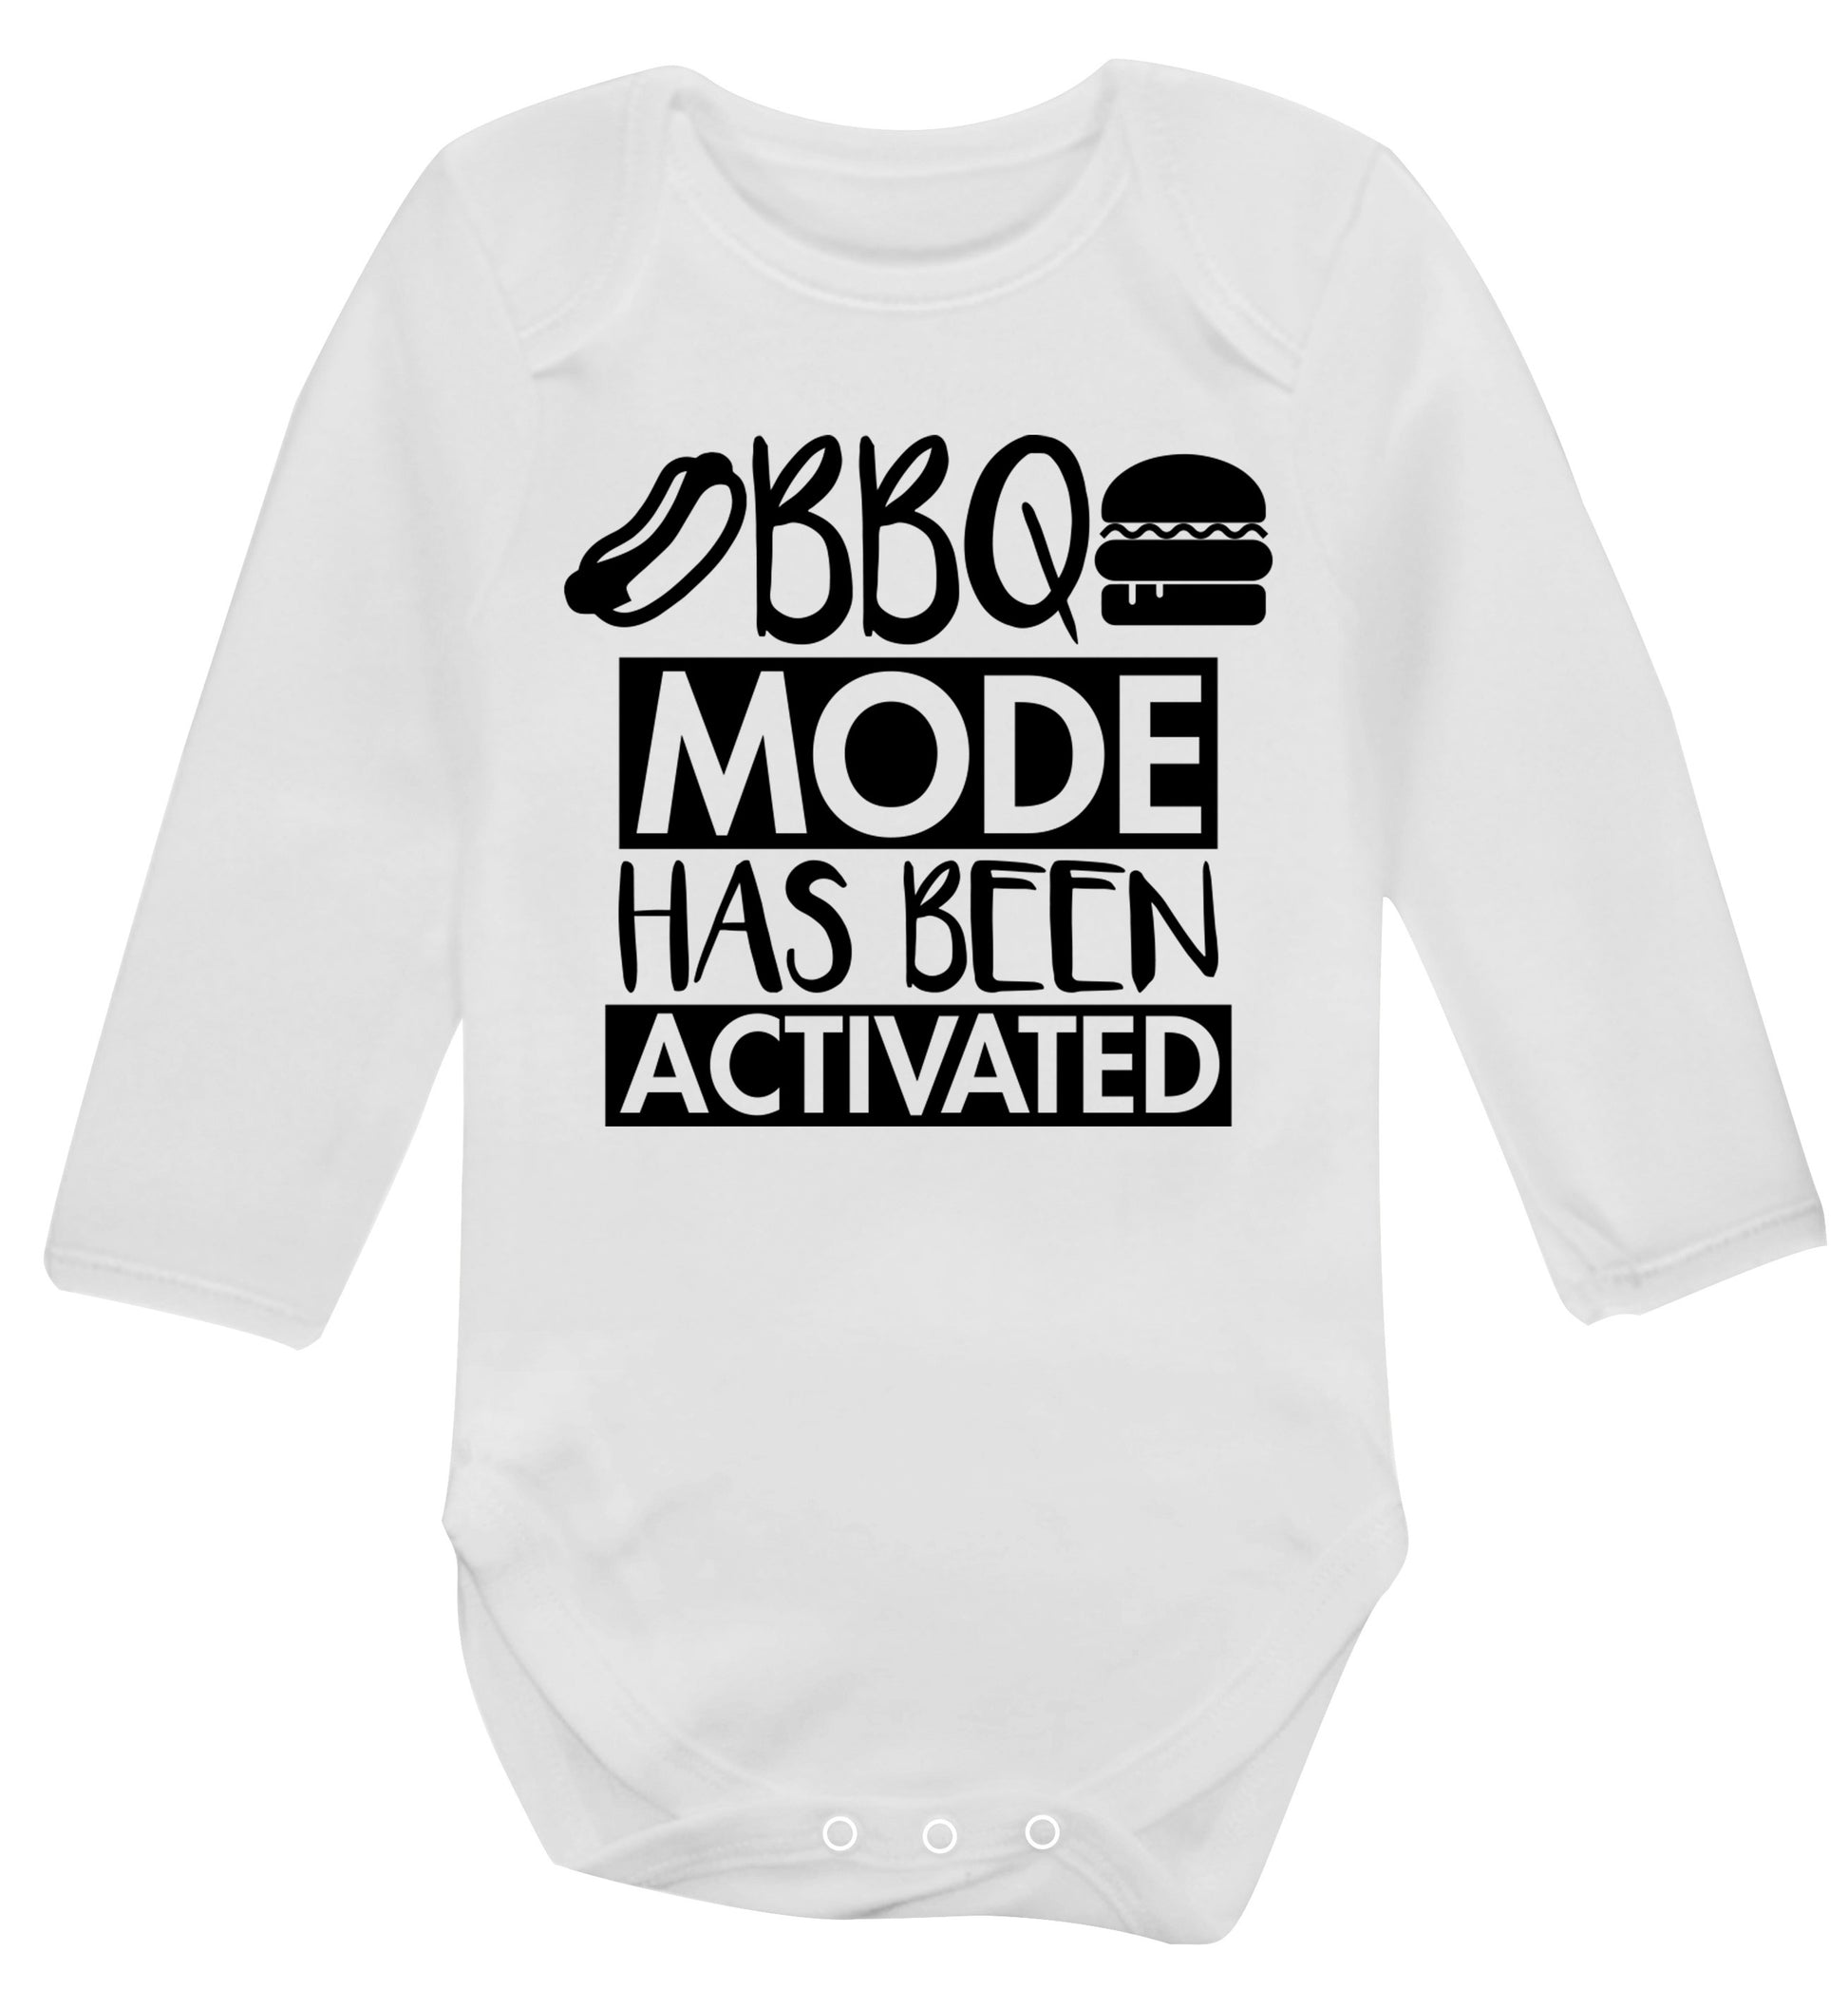 Bbq mode has been activated Baby Vest long sleeved white 6-12 months